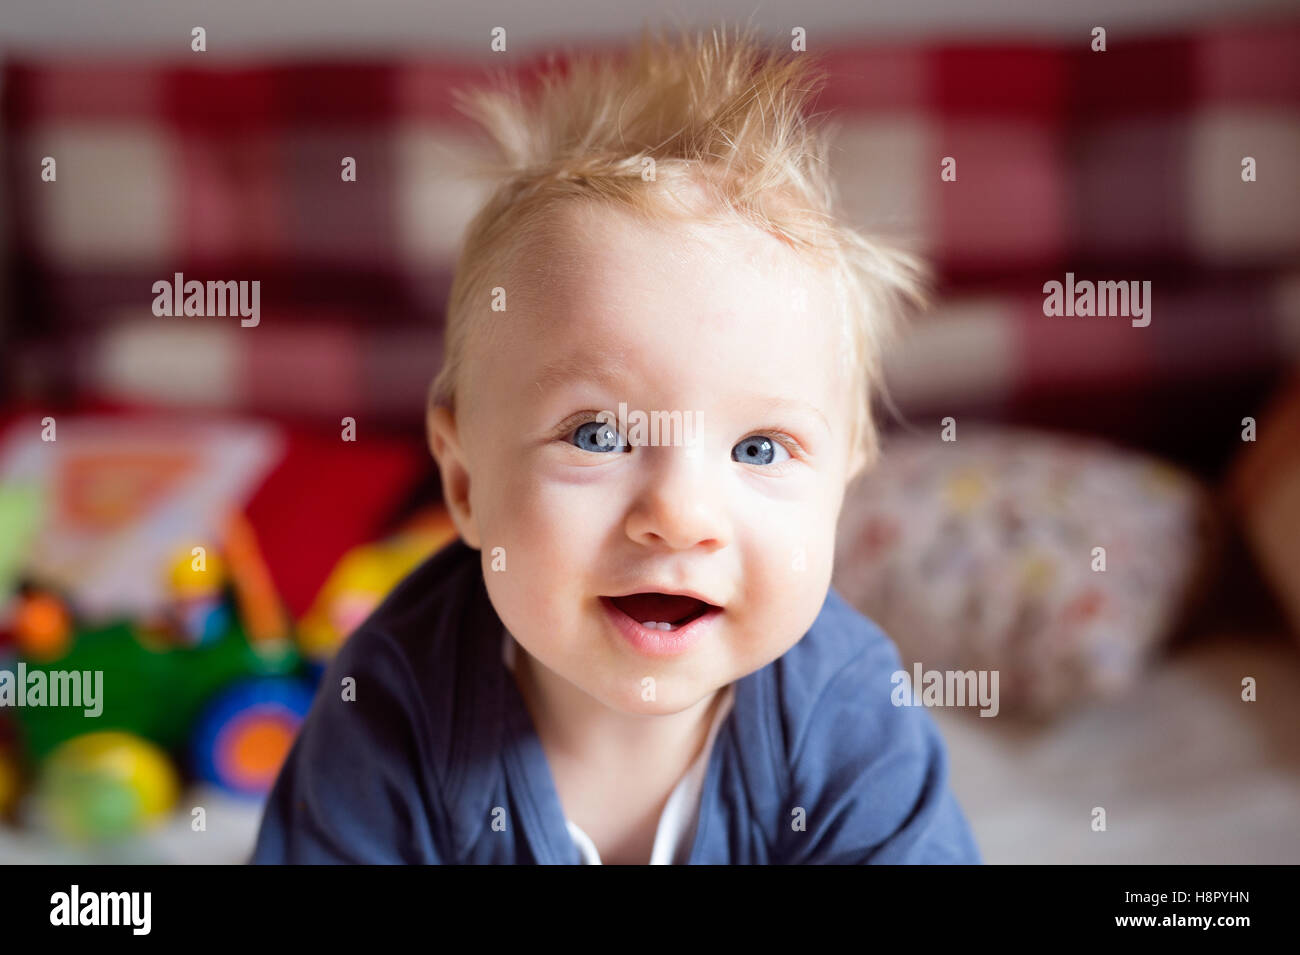 Little baby boy with spiky hair crawling on bed. Stock Photo